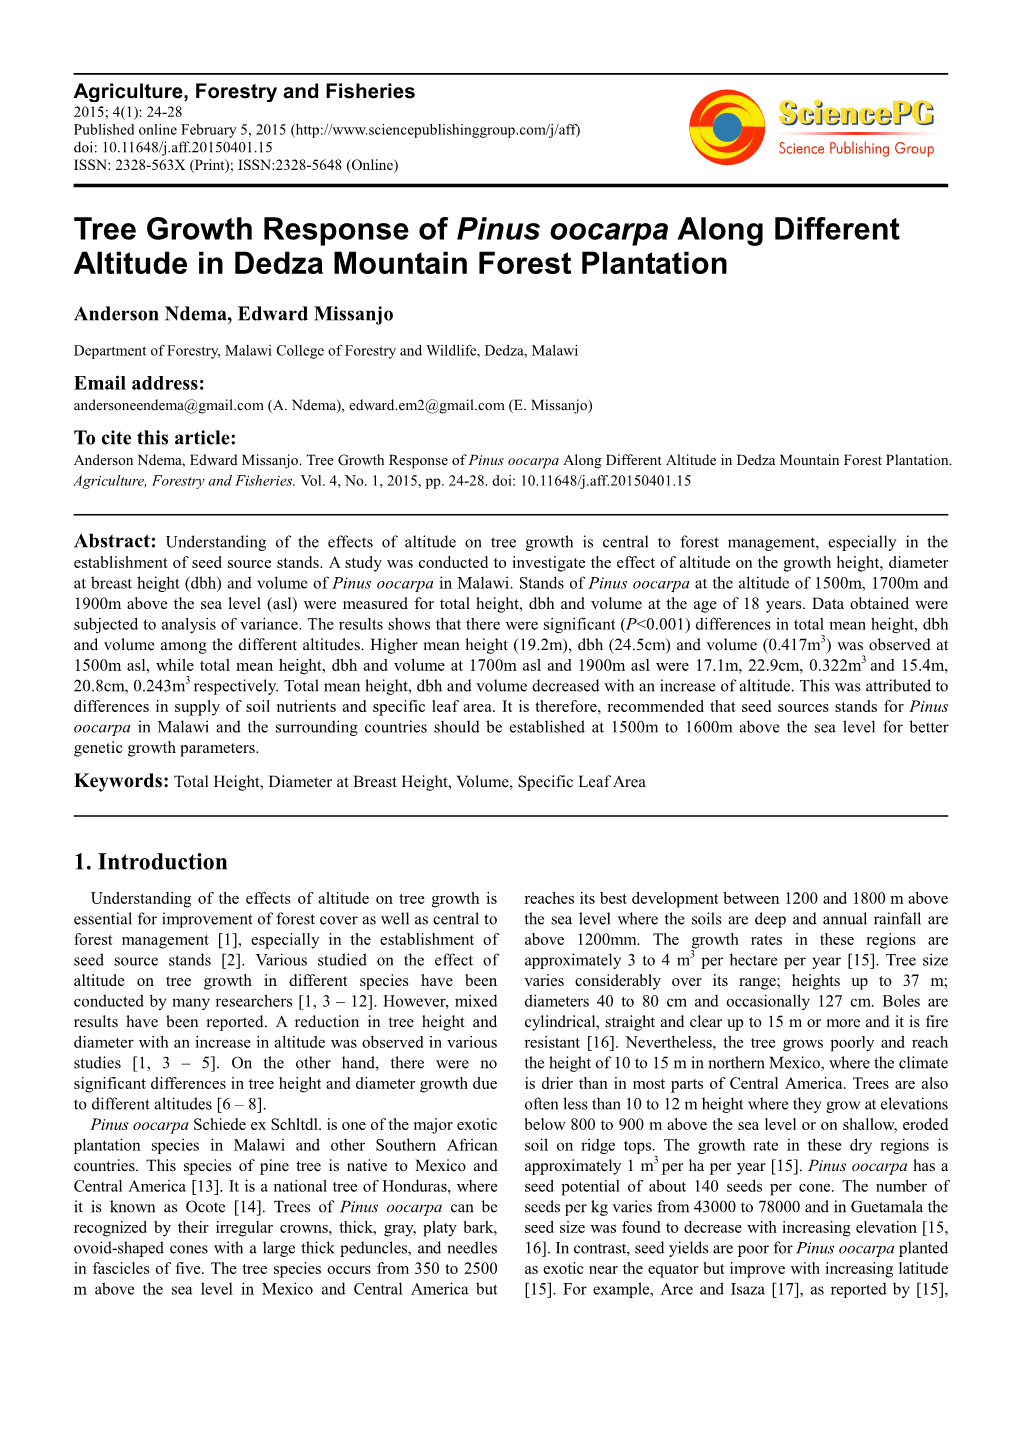 Tree Growth Response of Pinus Oocarpa Along Different Altitude in Dedza Mountain Forest Plantation